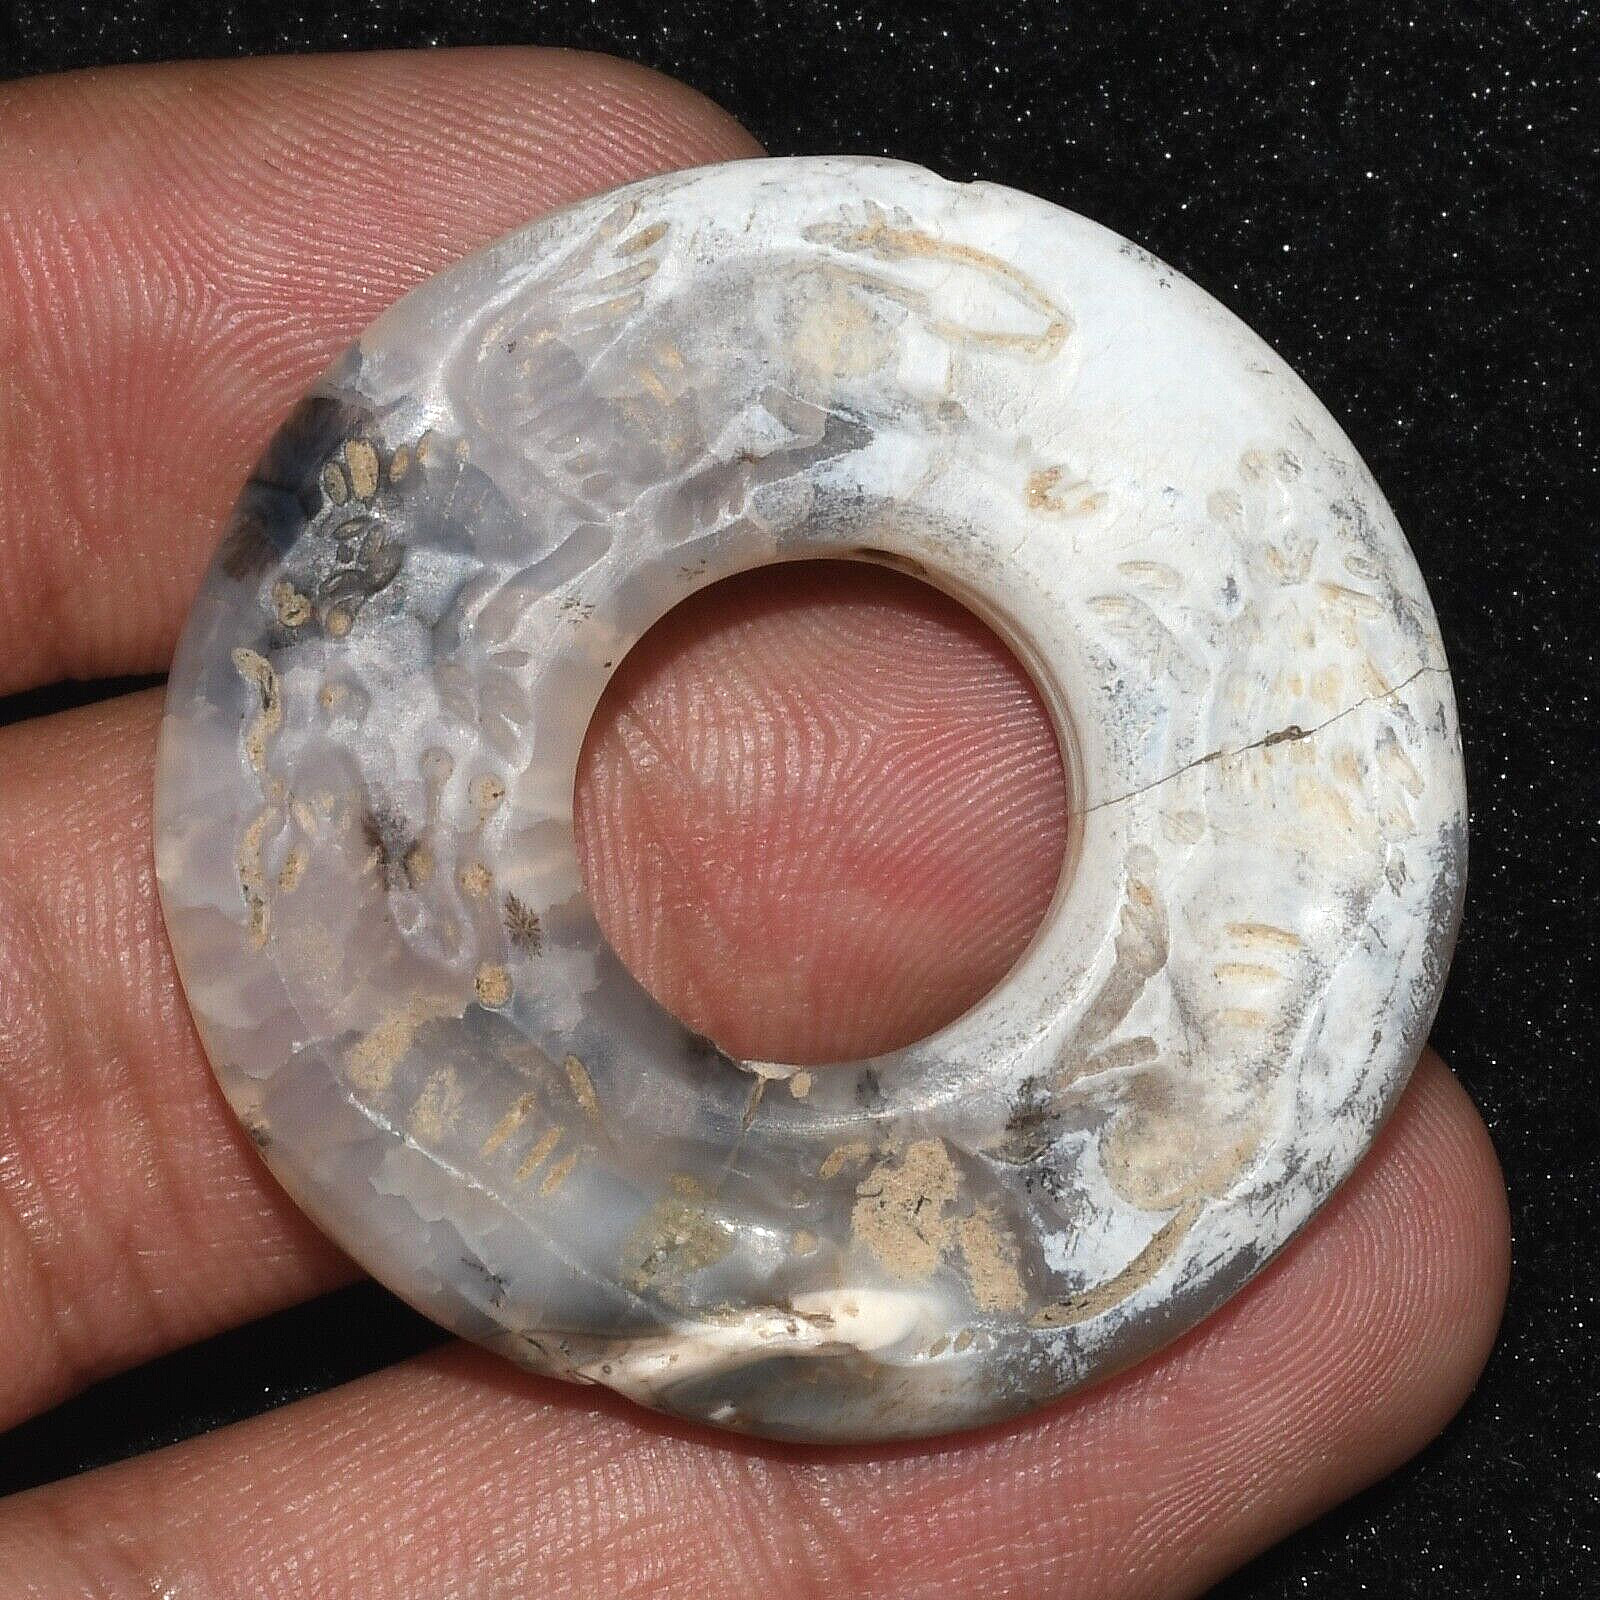 Genuine Ancient Chinese Jade Bi Disc Ring with Engravings Circa 3000-2000 BCE